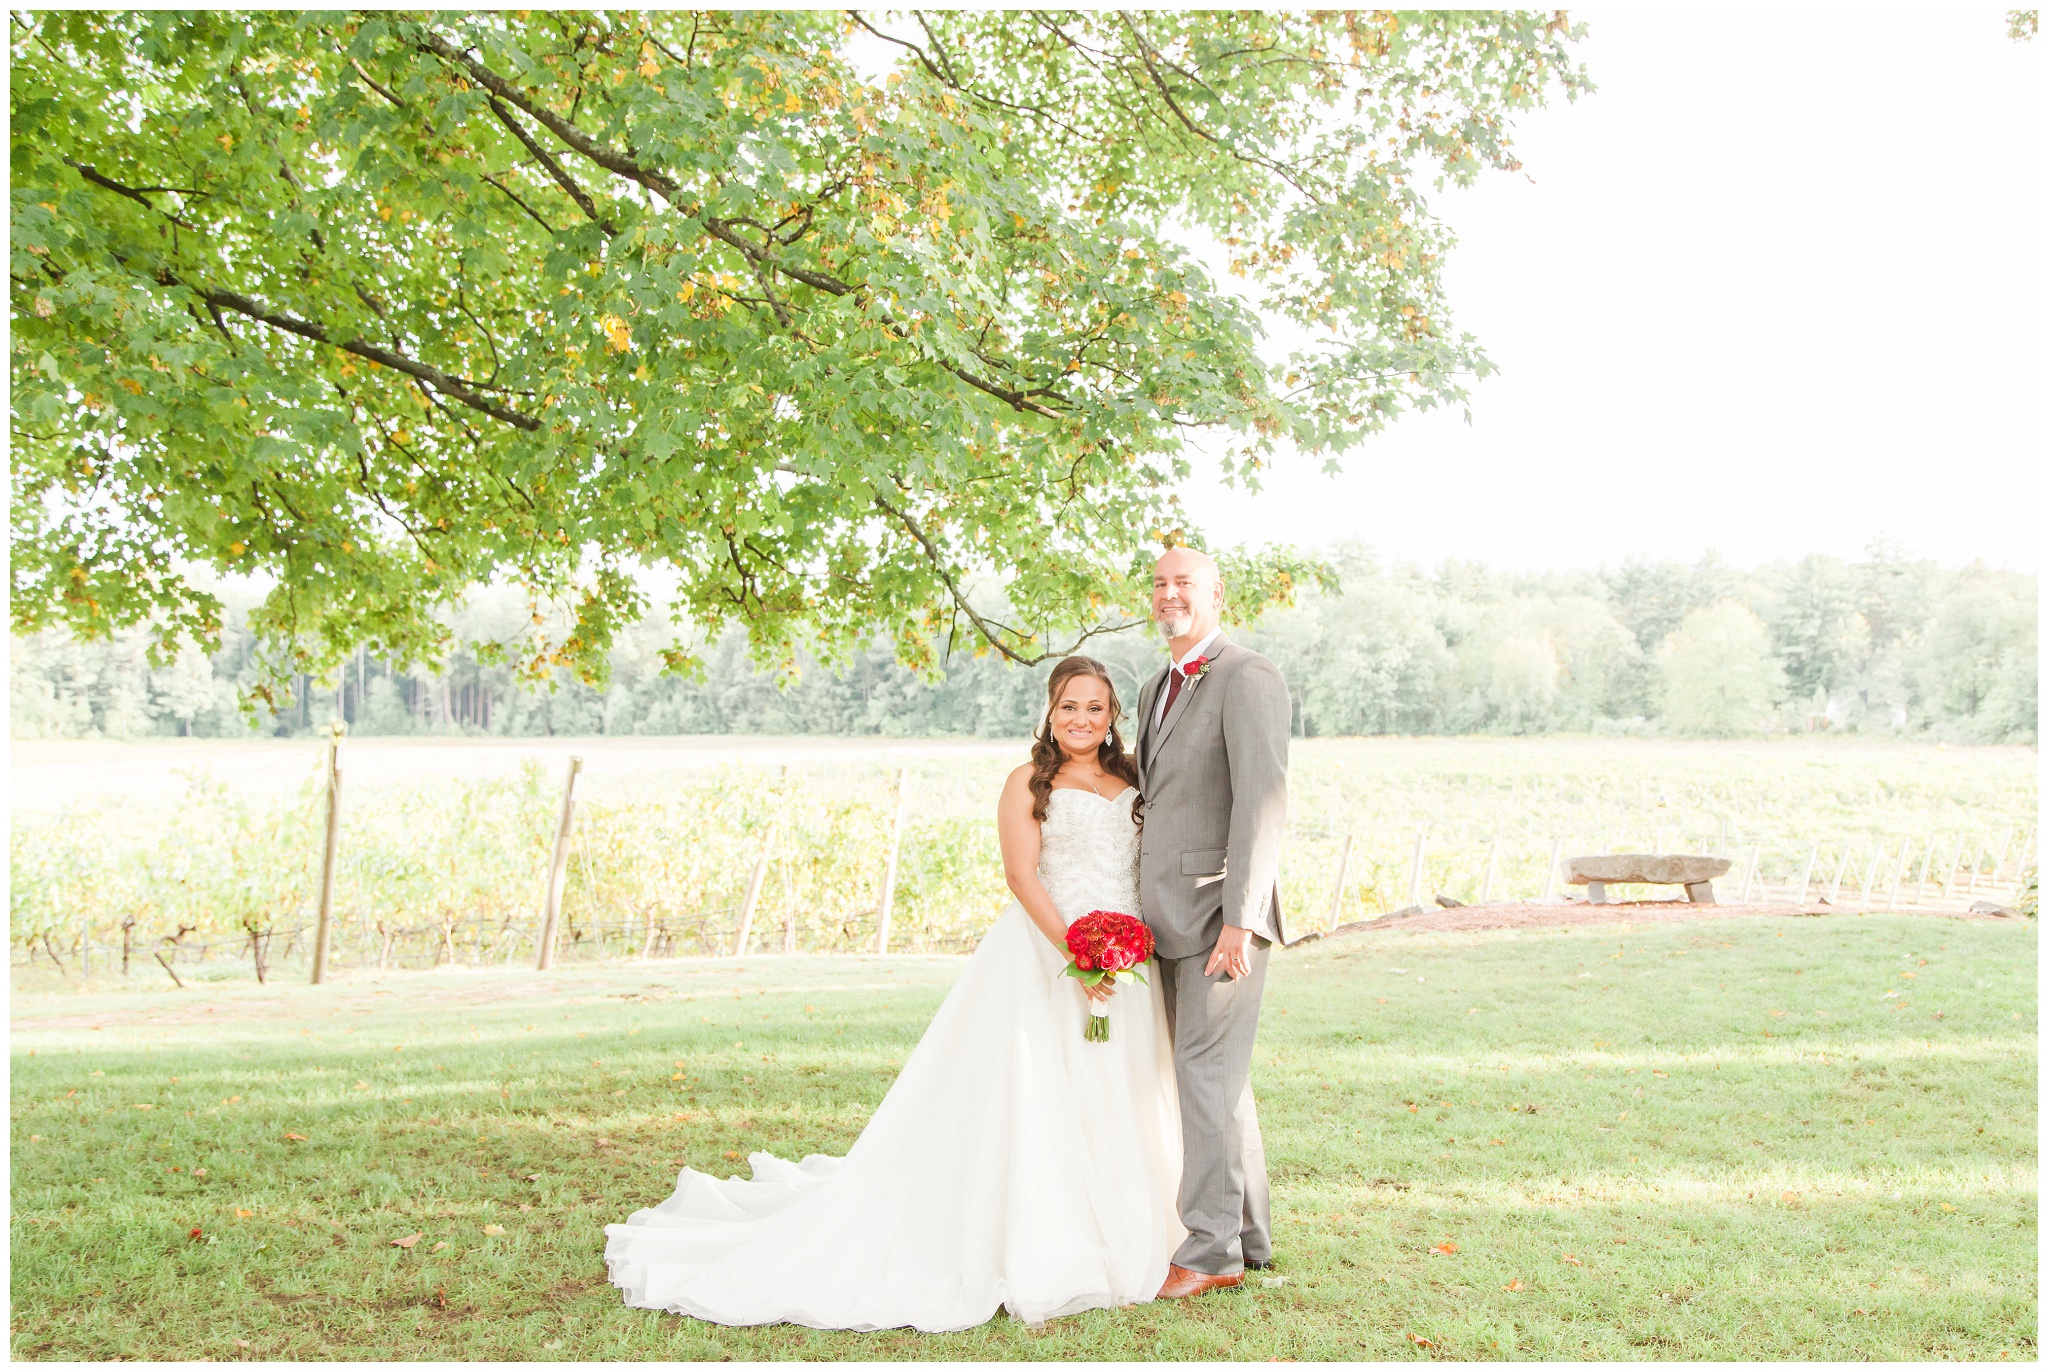 NH Outdoor Wedding | Flag Hill Winery | Lee, NH Wedding | Amy Brown Photography